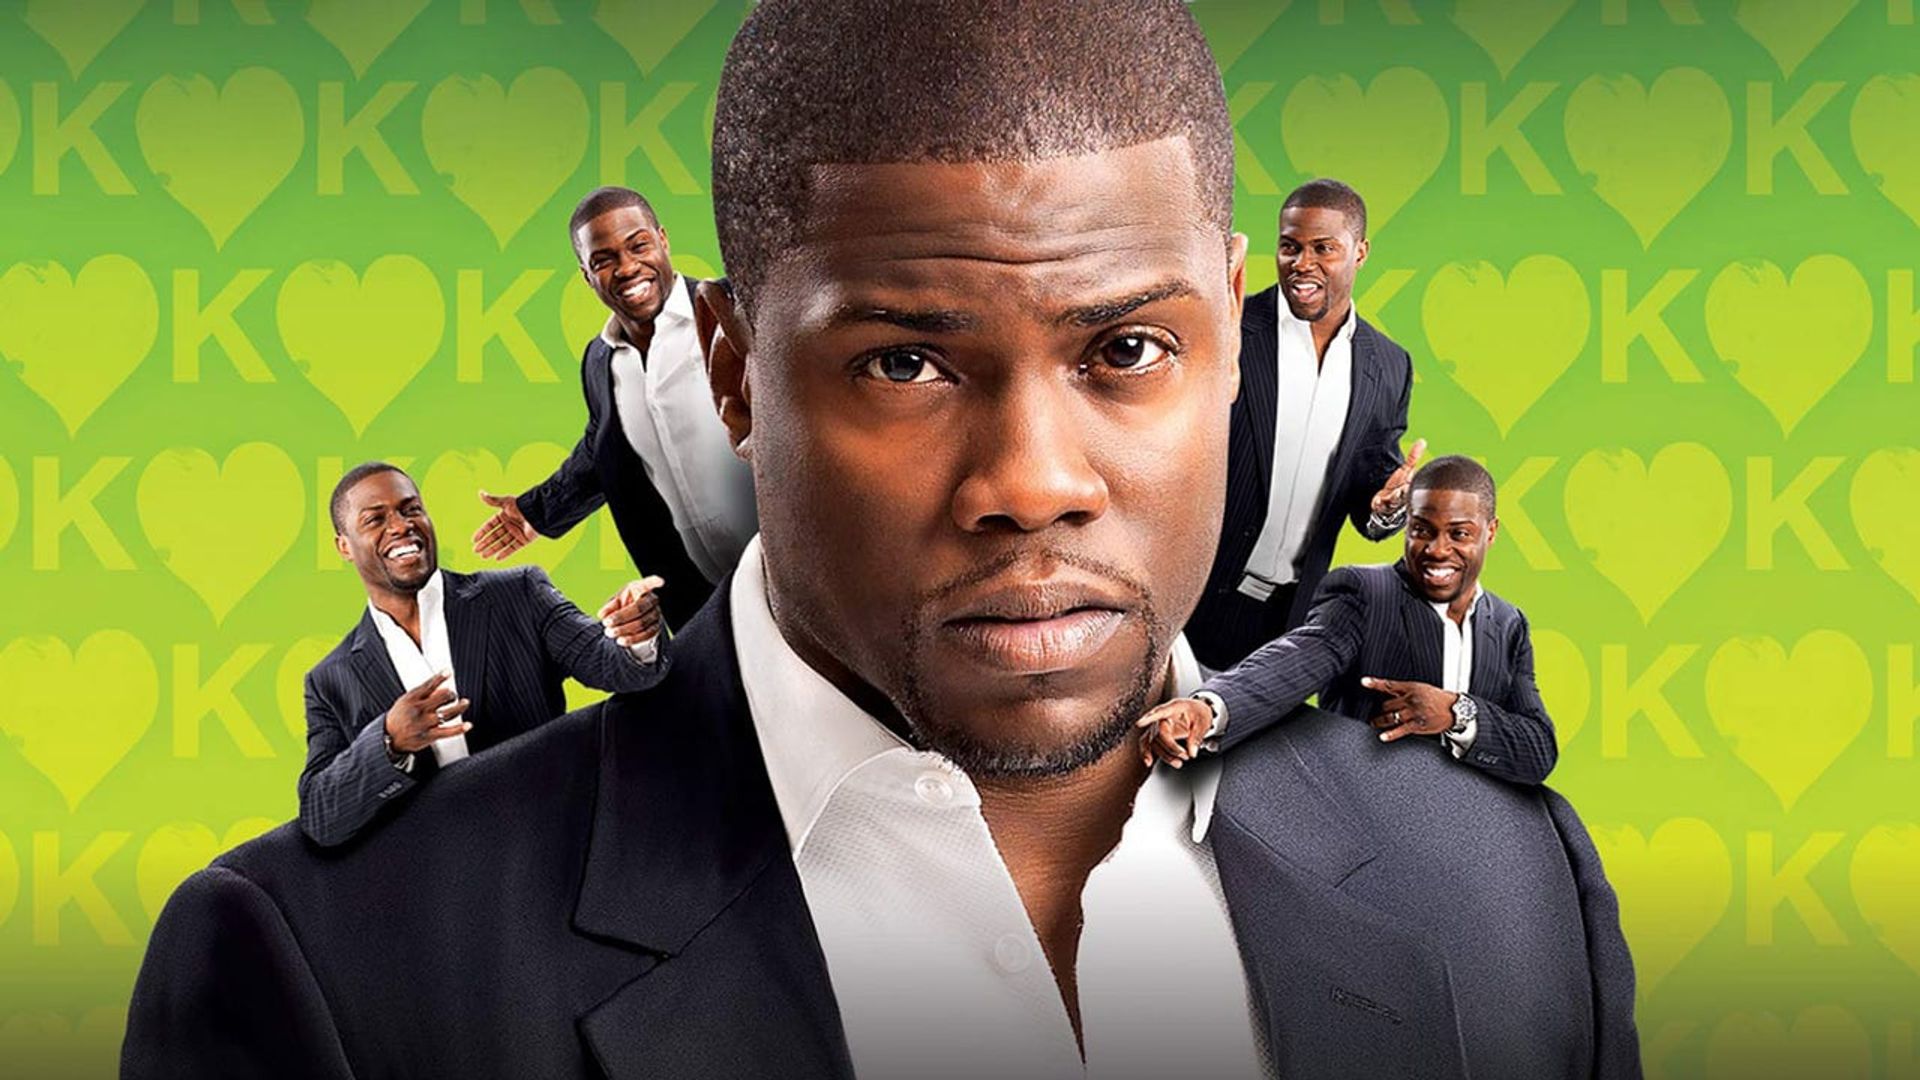 Kevin Hart: Seriously Funny background